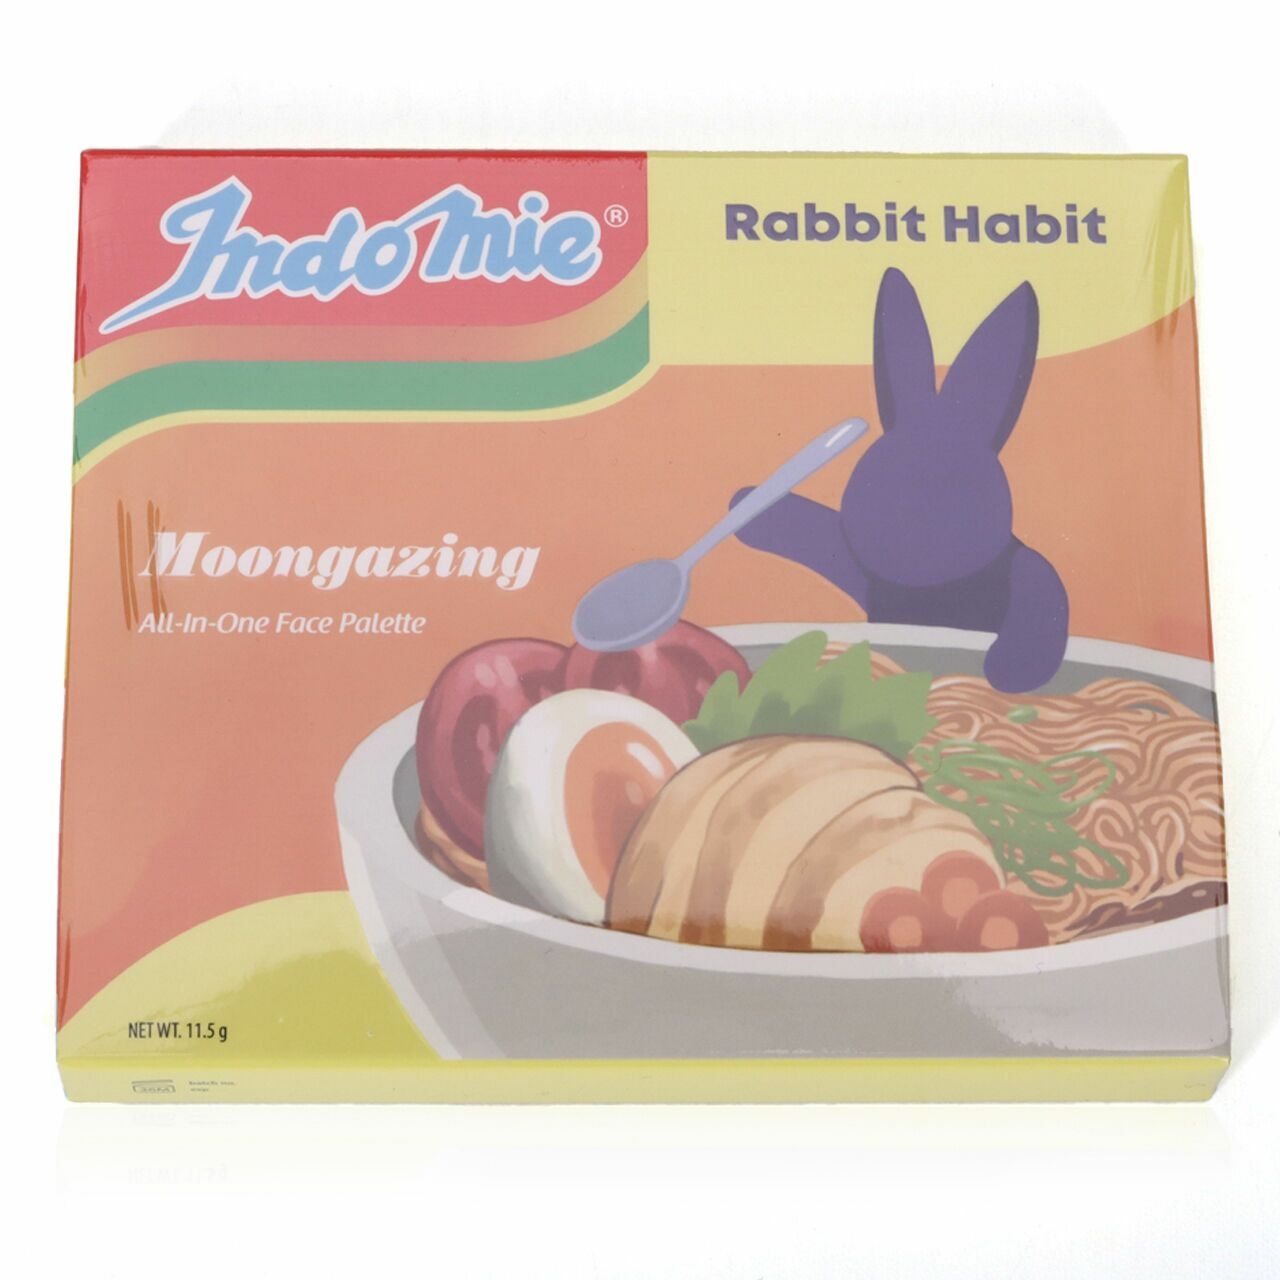 Rabbit Habit Moongazing All-In-One Face Palette